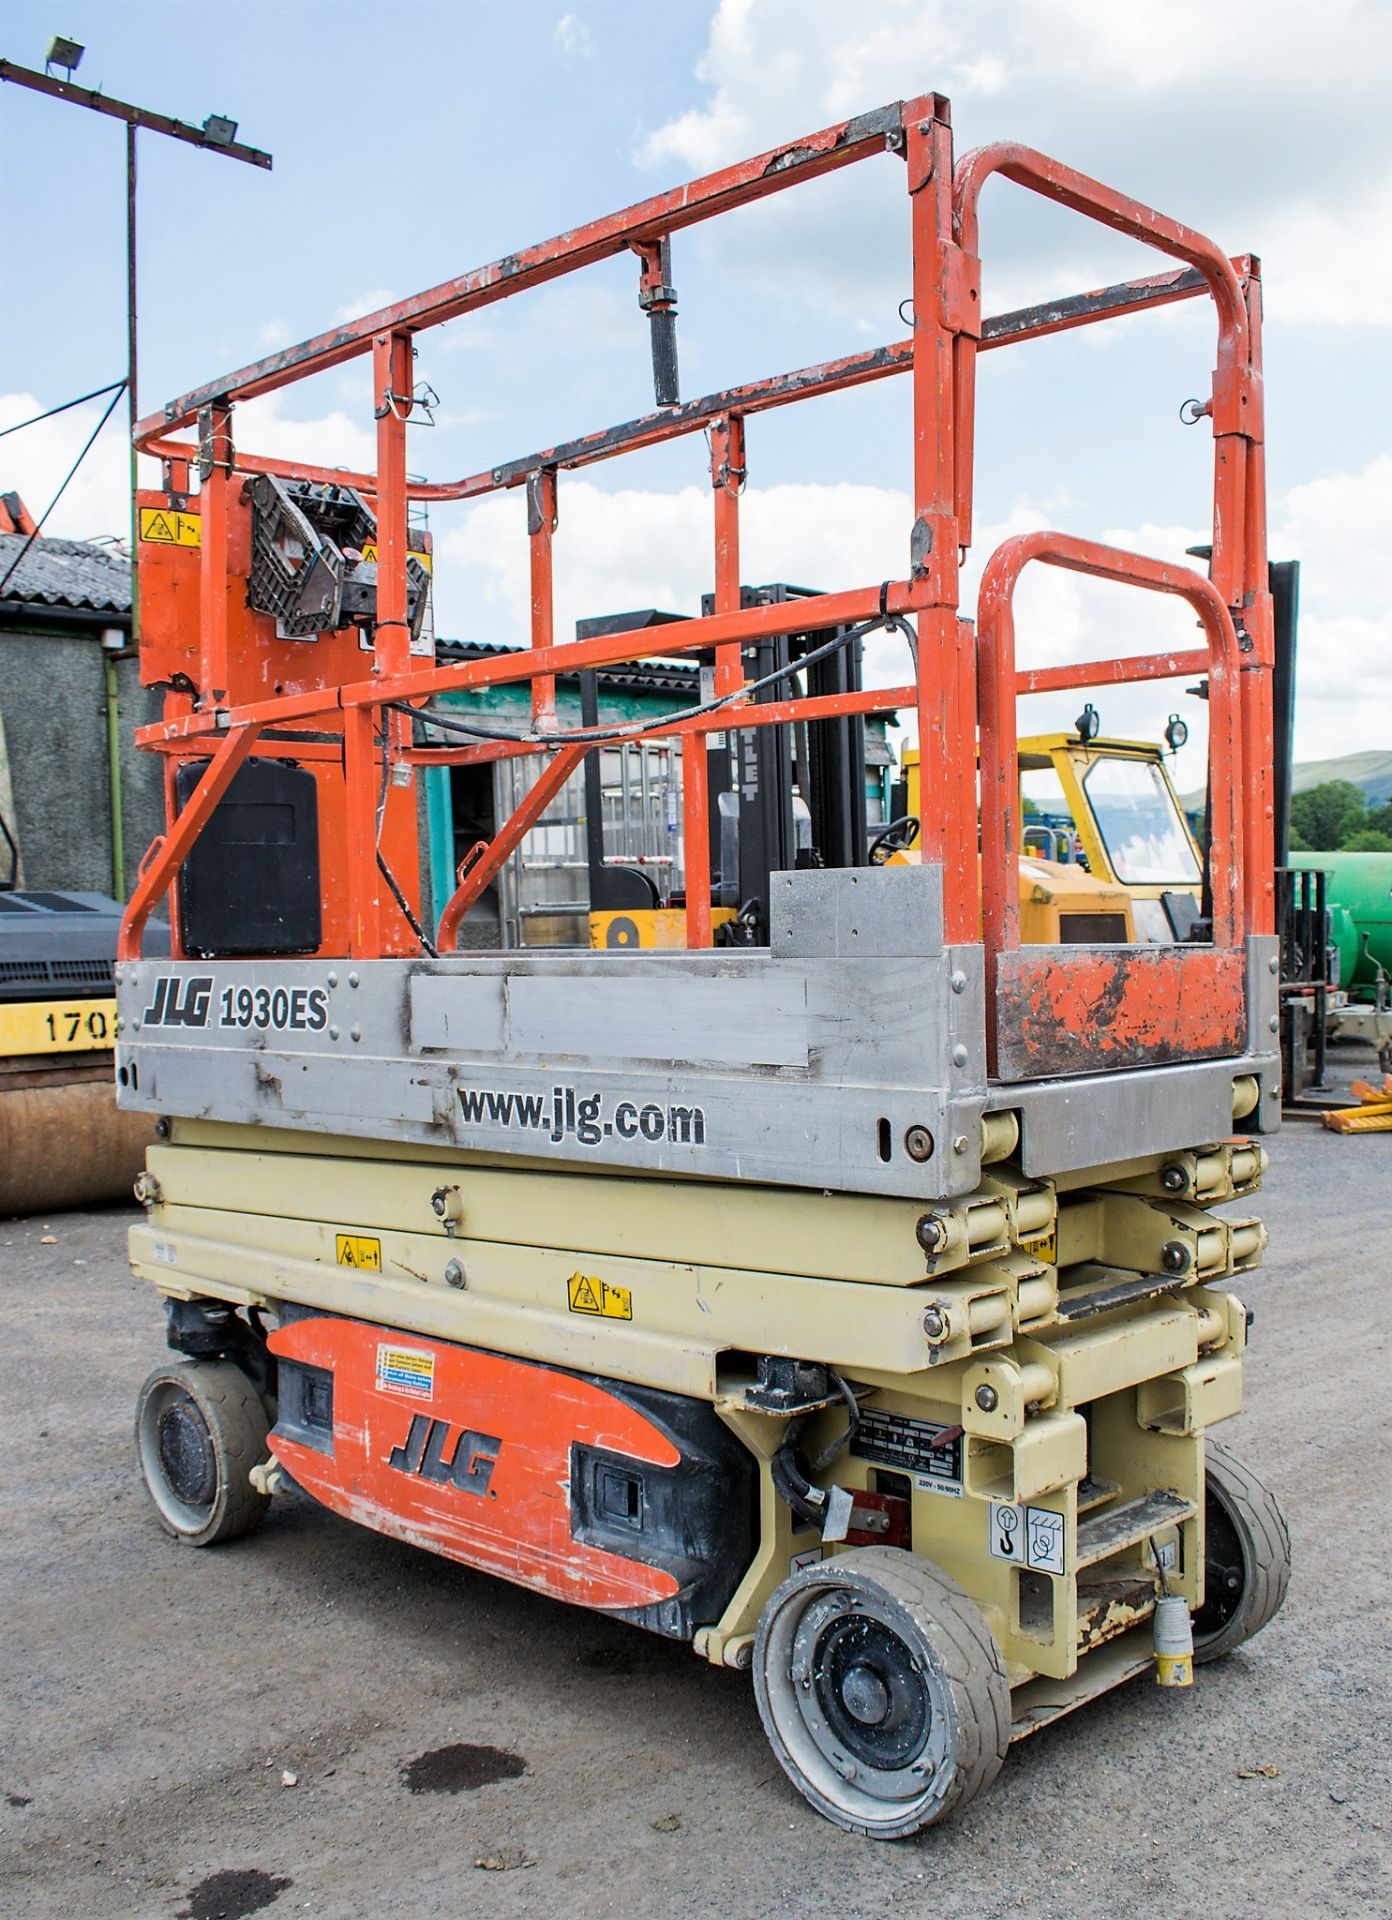 JLG 1930ES 19ft battery electric scissor lift access platform Year: 2004 S/N: 2893 Recorded hours: - Image 2 of 9